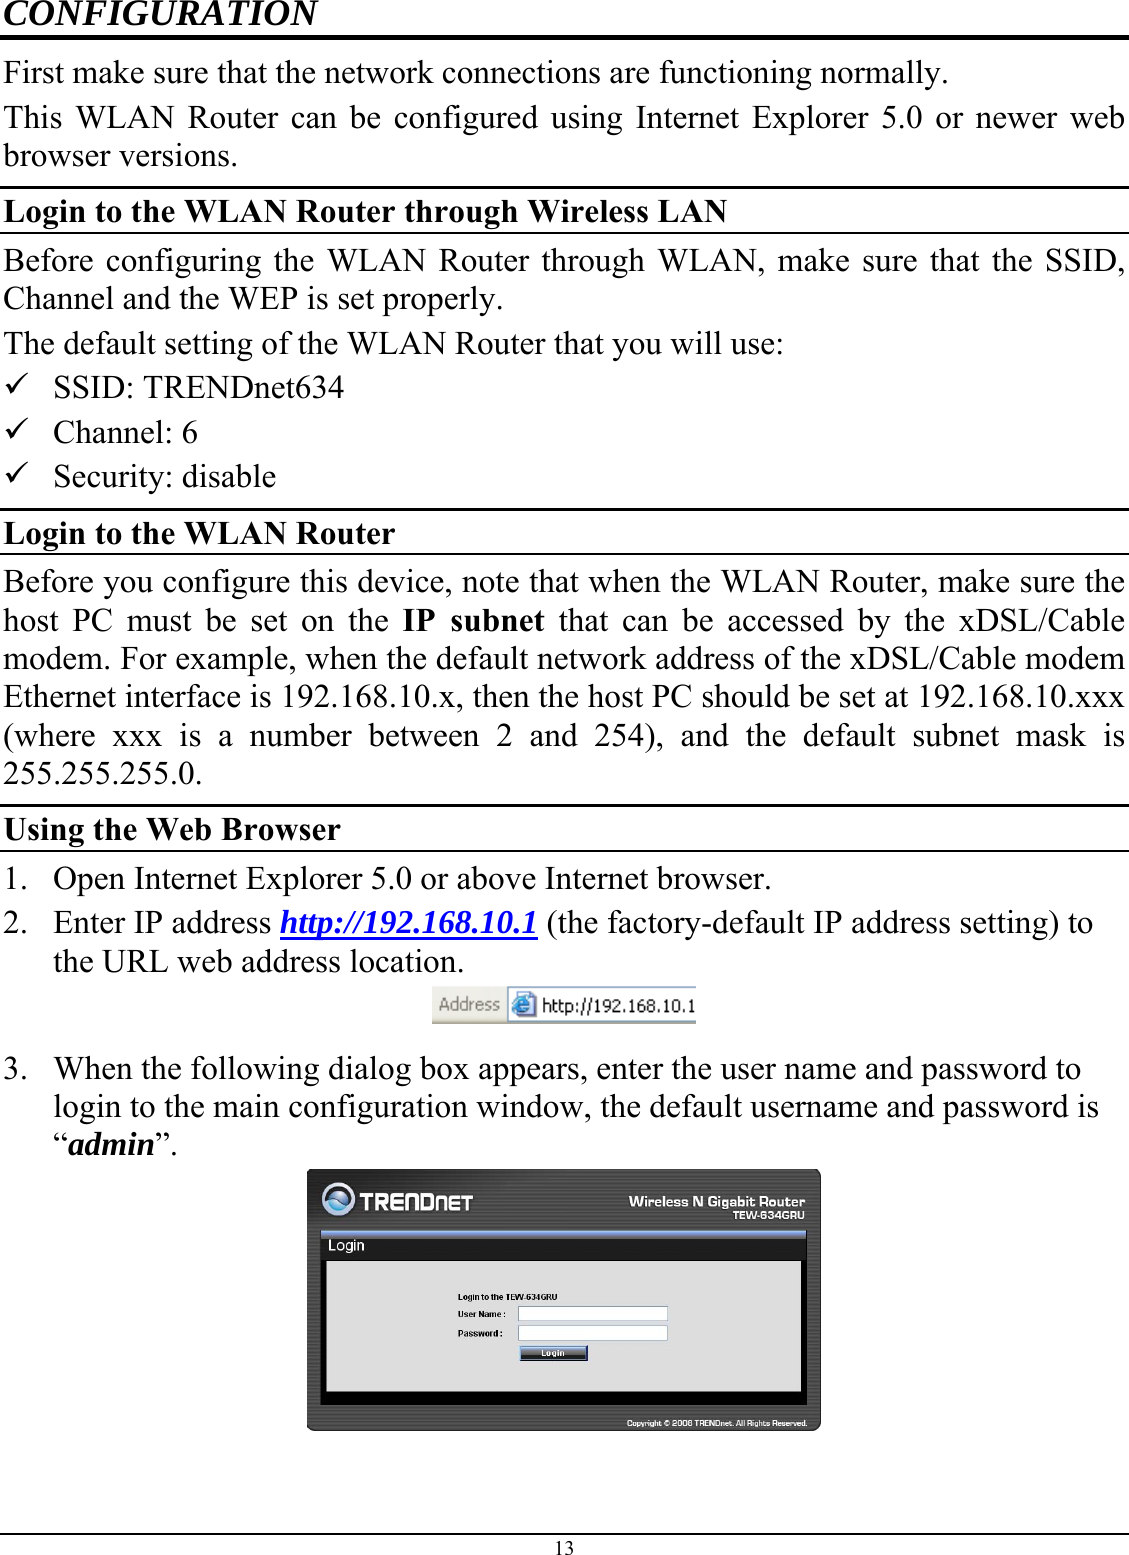 13 CONFIGURATION First make sure that the network connections are functioning normally.  This WLAN Router can be configured using Internet Explorer 5.0 or newer web browser versions. Login to the WLAN Router through Wireless LAN Before configuring the WLAN Router through WLAN, make sure that the SSID, Channel and the WEP is set properly. The default setting of the WLAN Router that you will use: 9 SSID: TRENDnet634 9 Channel: 6 9 Security: disable Login to the WLAN Router Before you configure this device, note that when the WLAN Router, make sure the host PC must be set on the IP subnet that can be accessed by the xDSL/Cable modem. For example, when the default network address of the xDSL/Cable modem Ethernet interface is 192.168.10.x, then the host PC should be set at 192.168.10.xxx (where xxx is a number between 2 and 254), and the default subnet mask is 255.255.255.0. Using the Web Browser 1. Open Internet Explorer 5.0 or above Internet browser. 2. Enter IP address http://192.168.10.1 (the factory-default IP address setting) to the URL web address location.  3. When the following dialog box appears, enter the user name and password to login to the main configuration window, the default username and password is “admin”.  